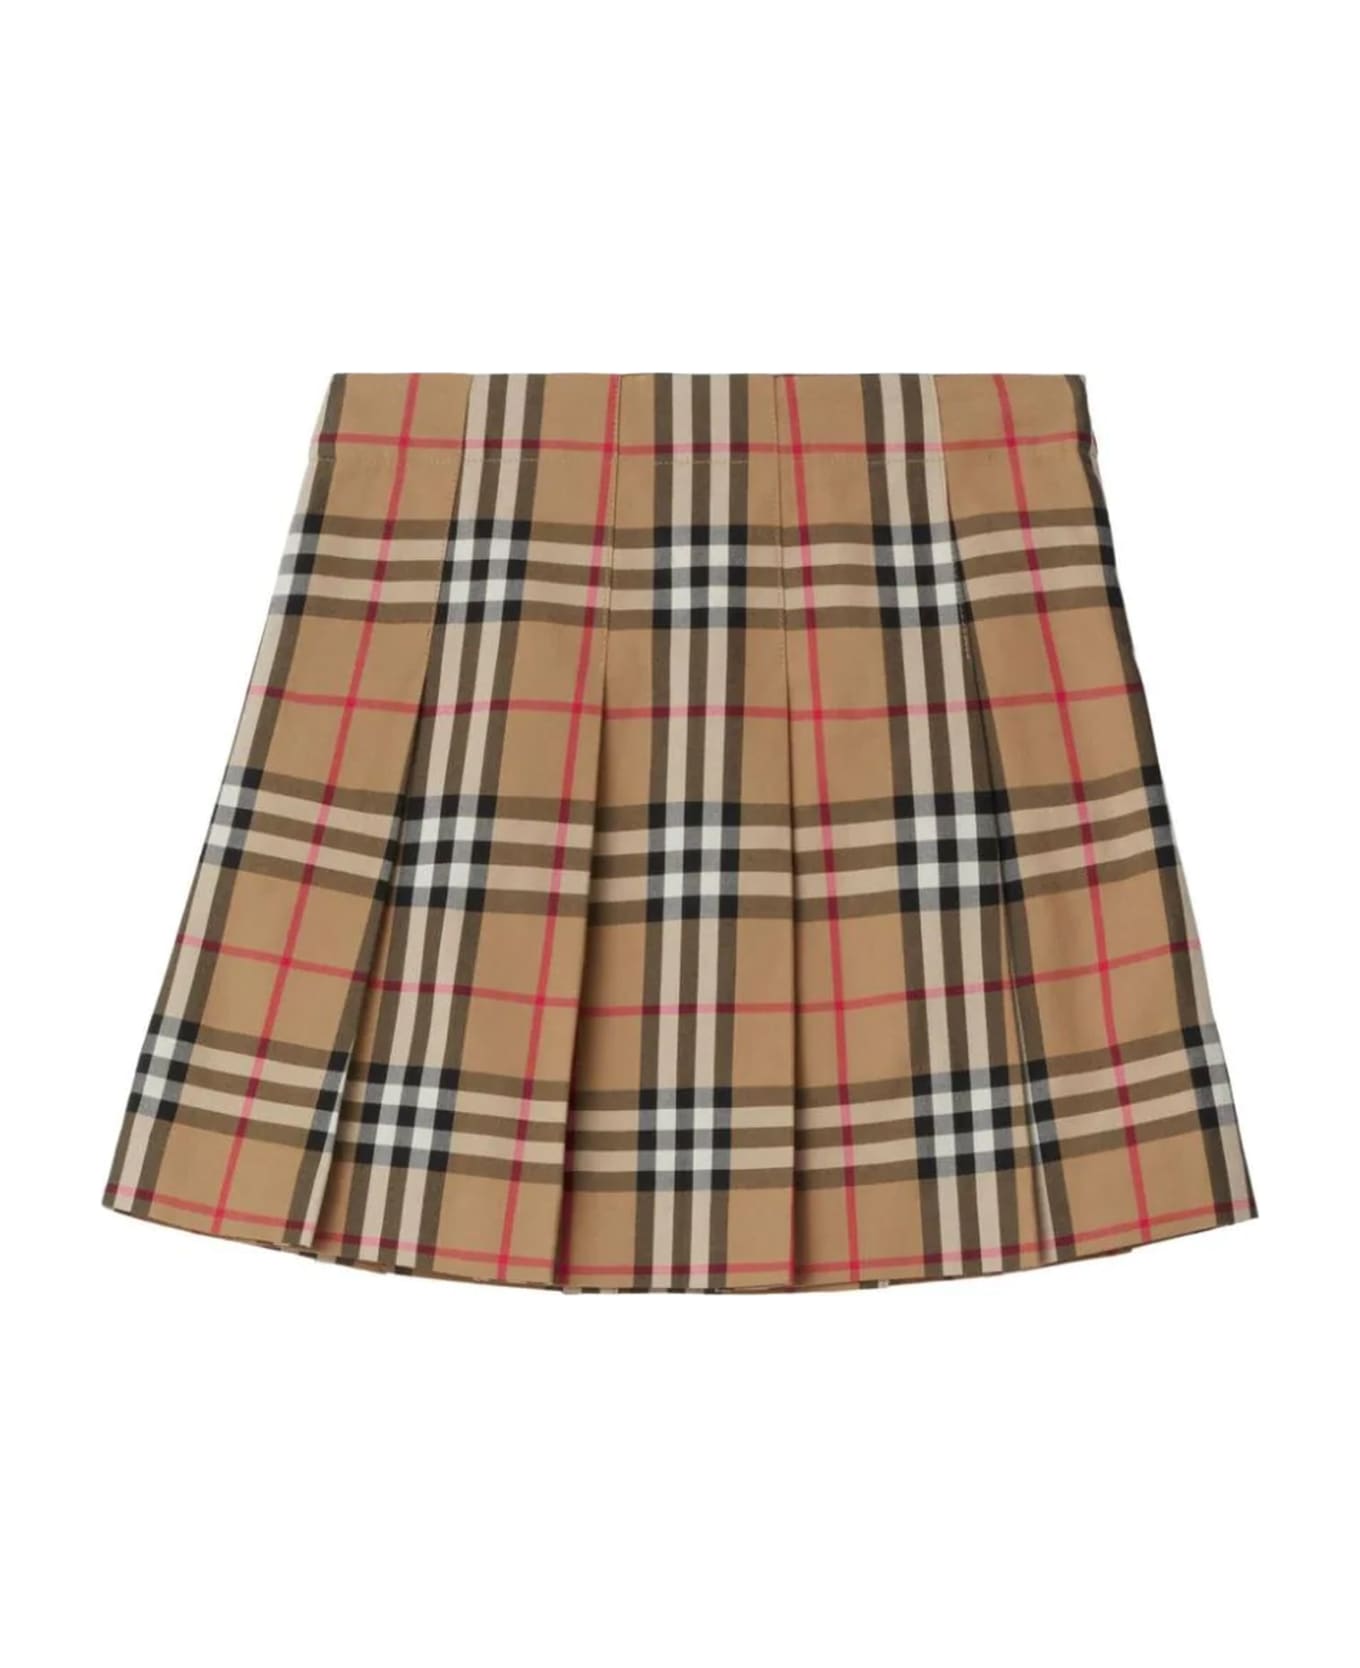 Burberry Beige Cotton Skirt - Archive beige ip chk ボトムス